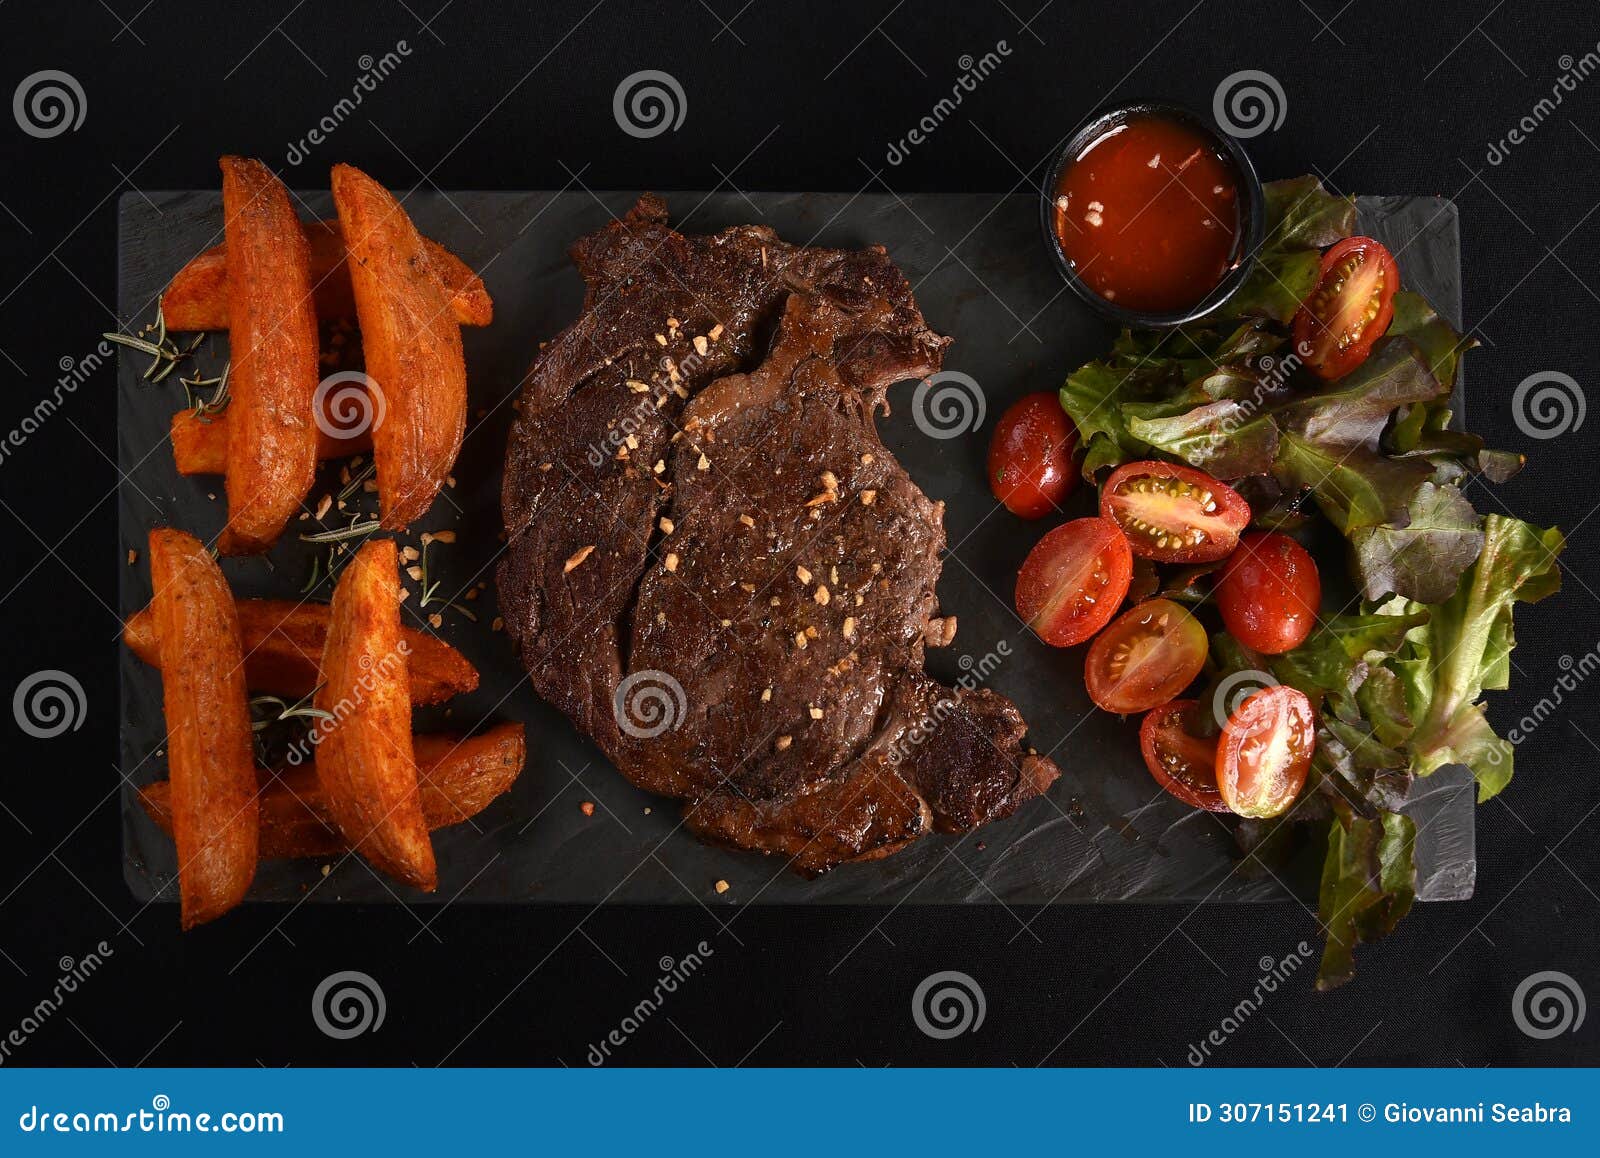 ancho beef steak with rustic roast potatoes and salad with herb dressing